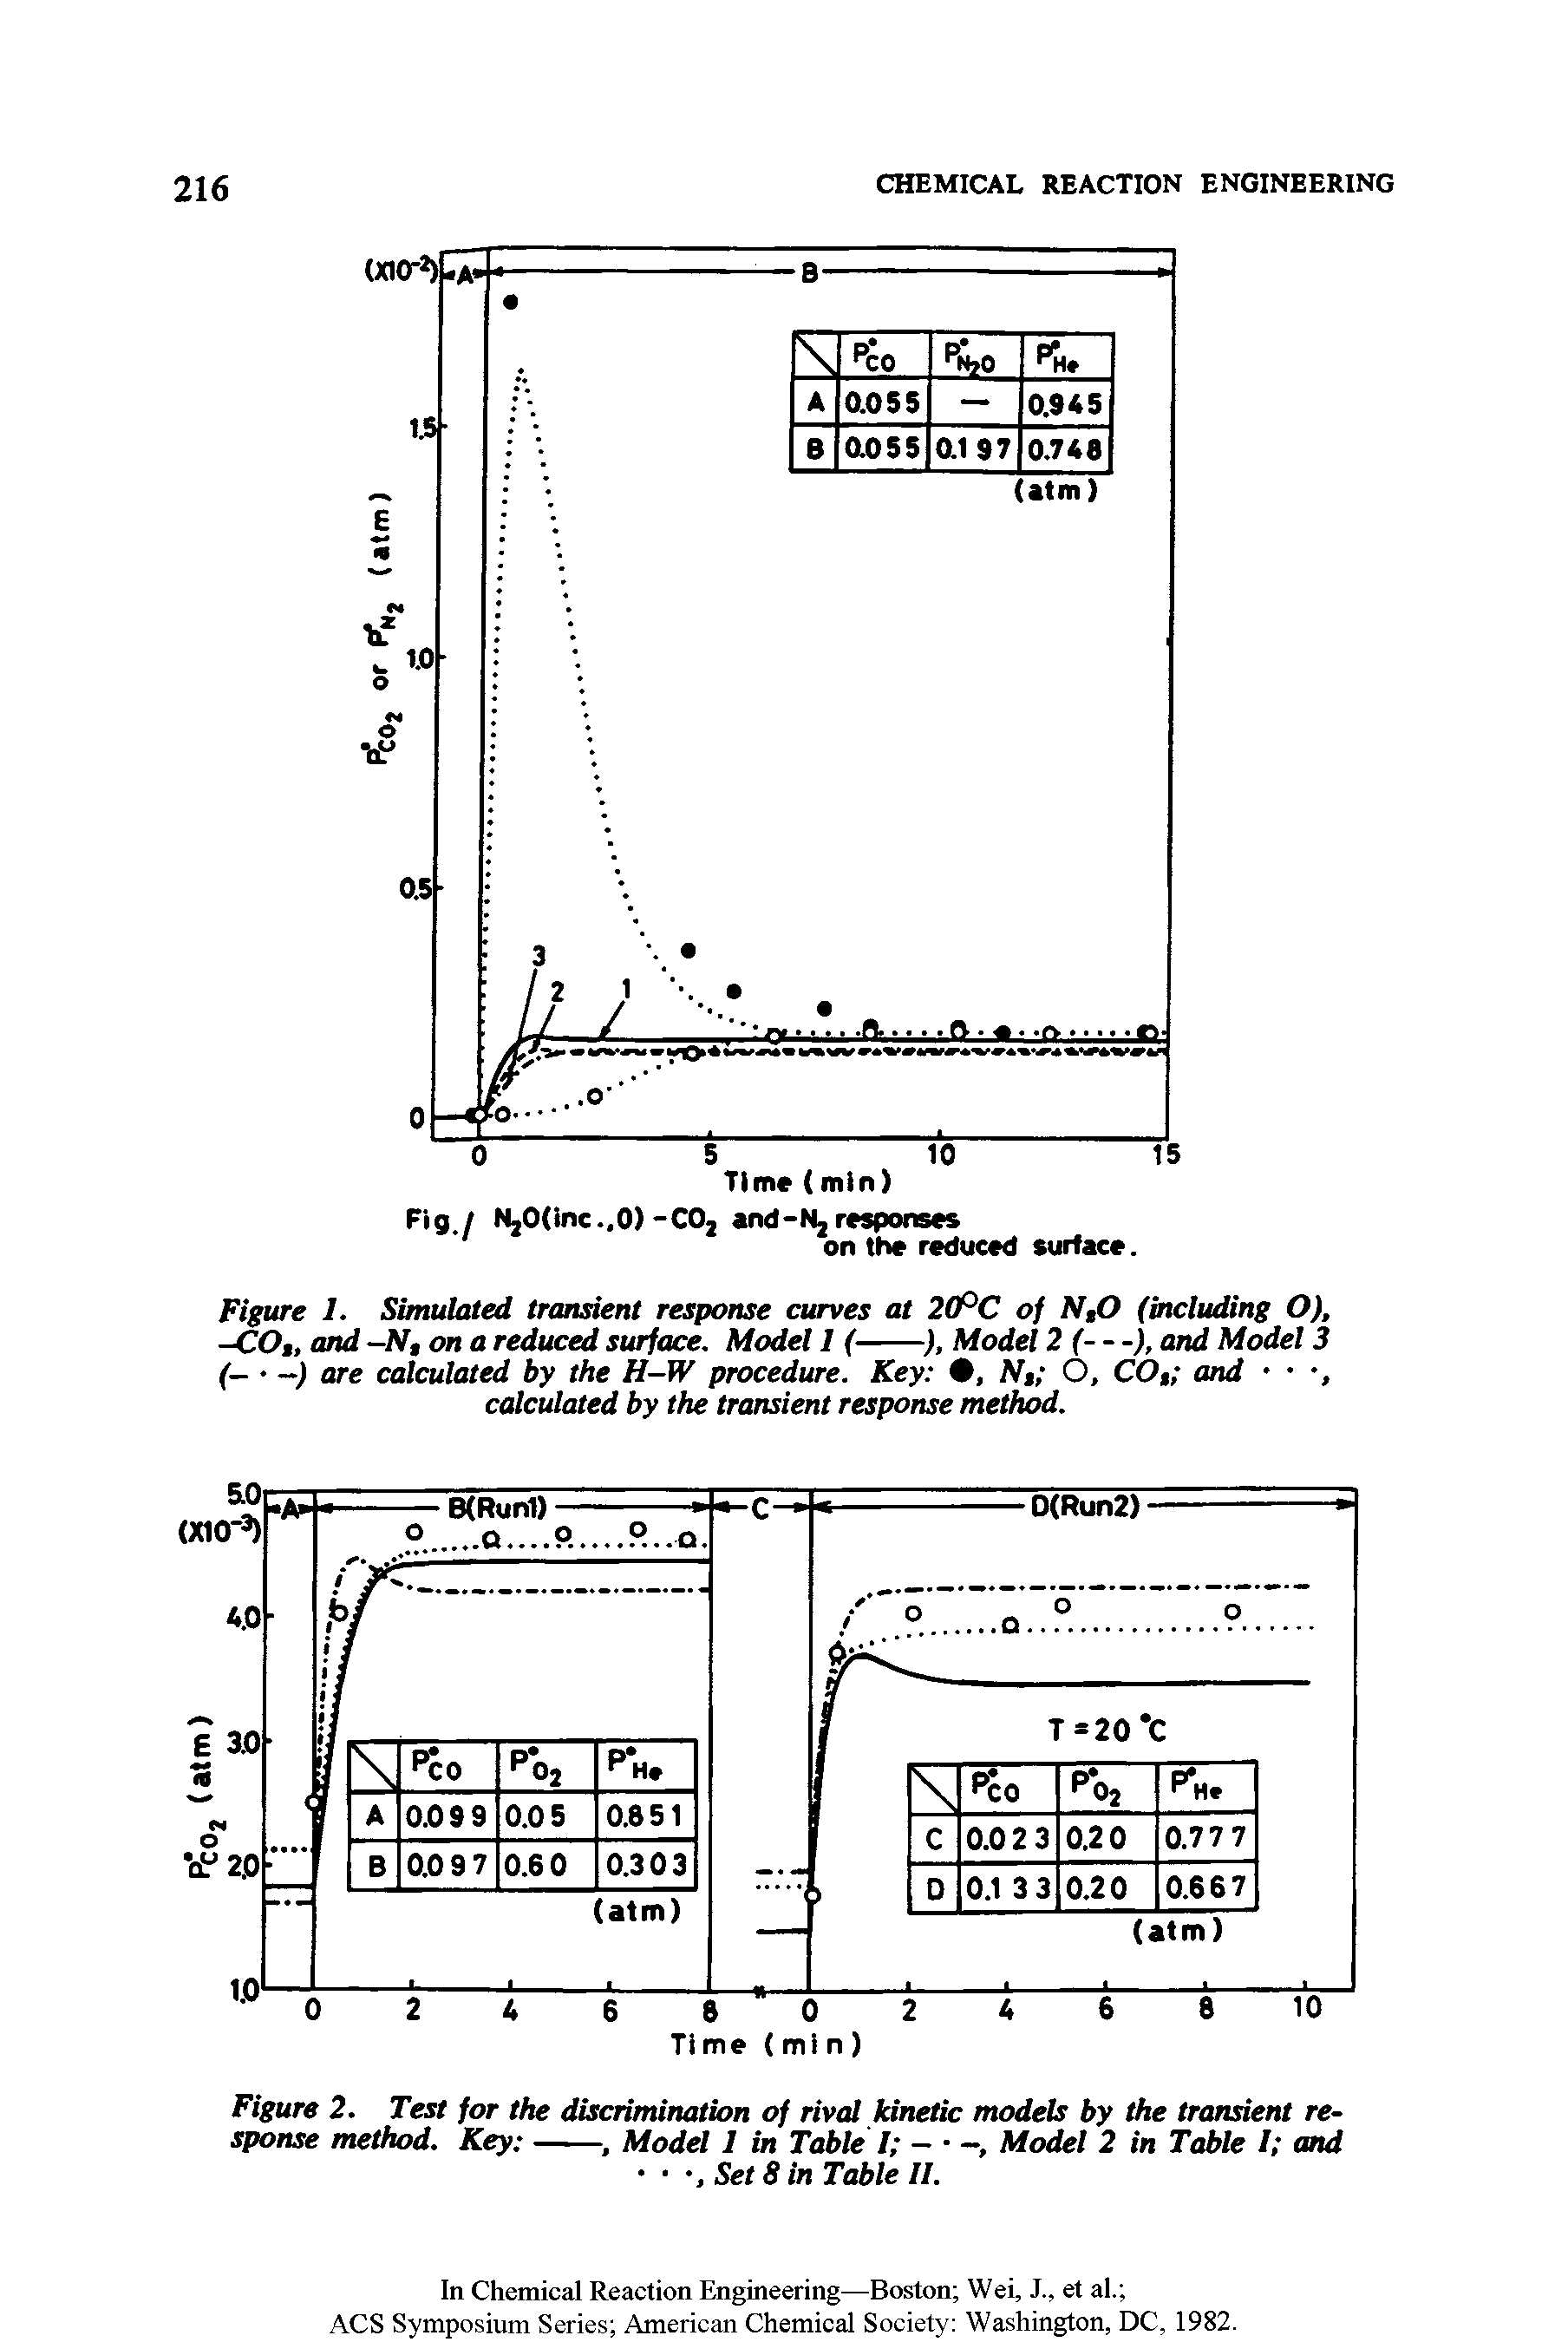 Figure 2. Test for the discrimination of rival kinetic models by the transient response method. Key --------, Model 1 in Table 1 — Model 2 in Table l and...